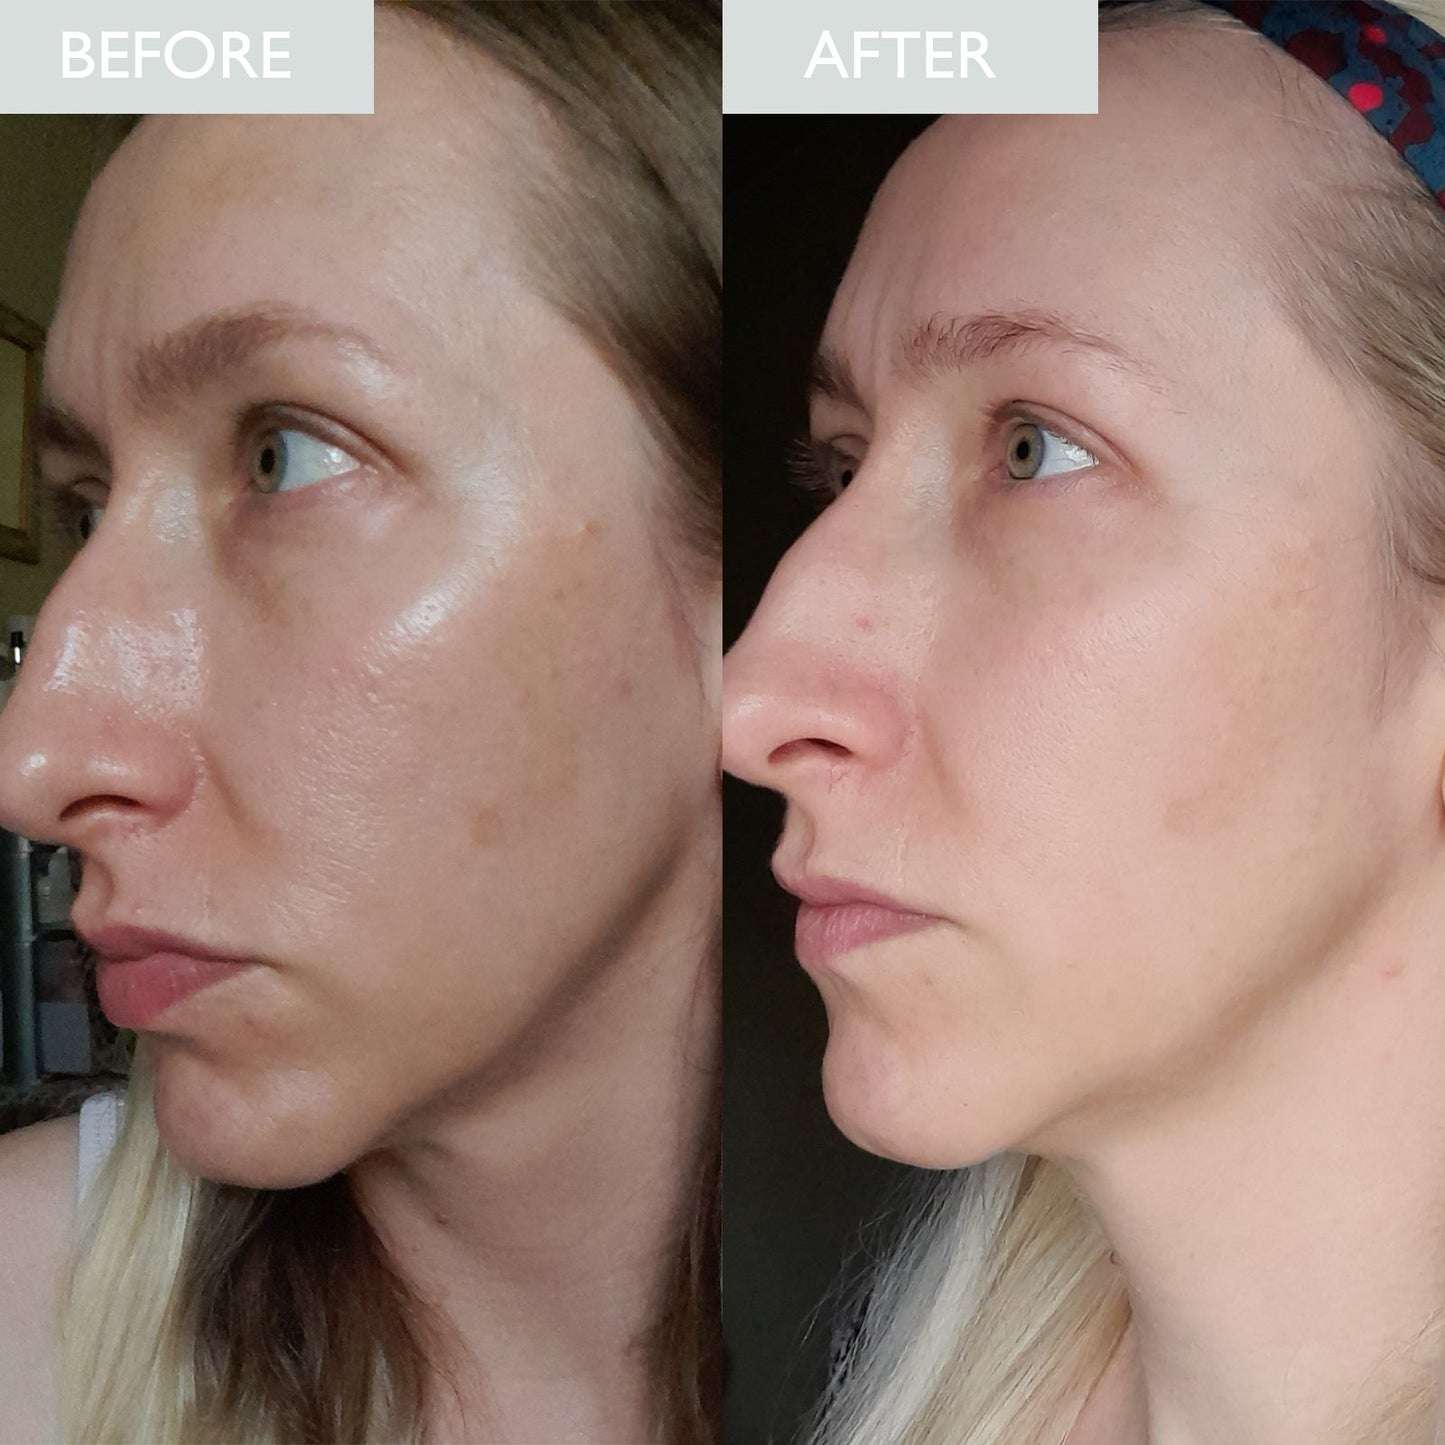 Before and after results of a lady with oily skin having used the green clay mask